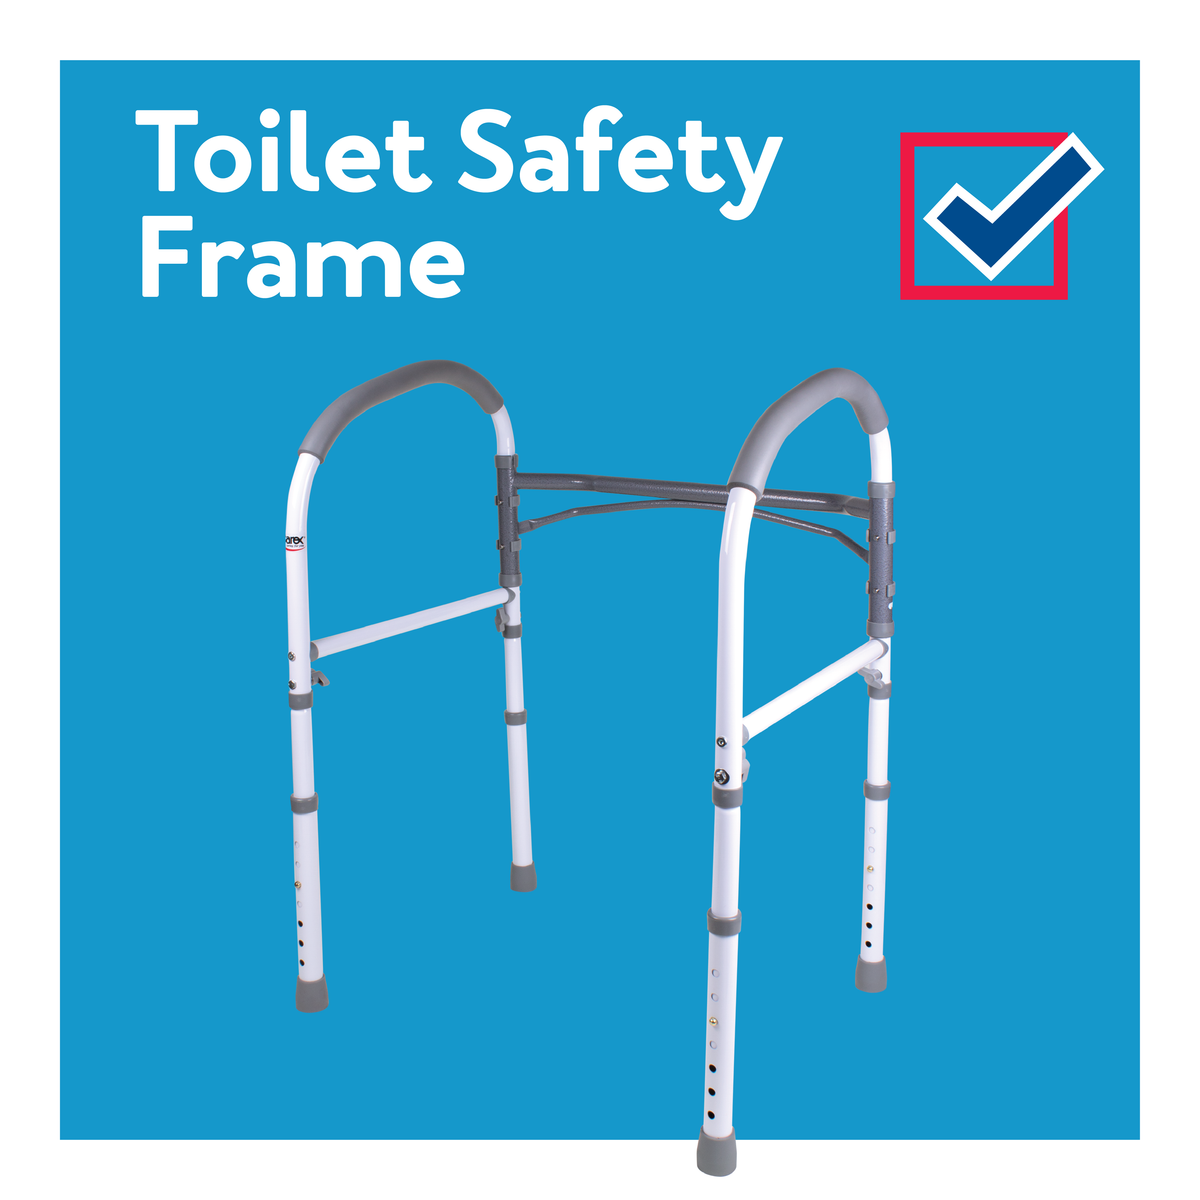 A toilet safety frame on a blue background next to a checkmark